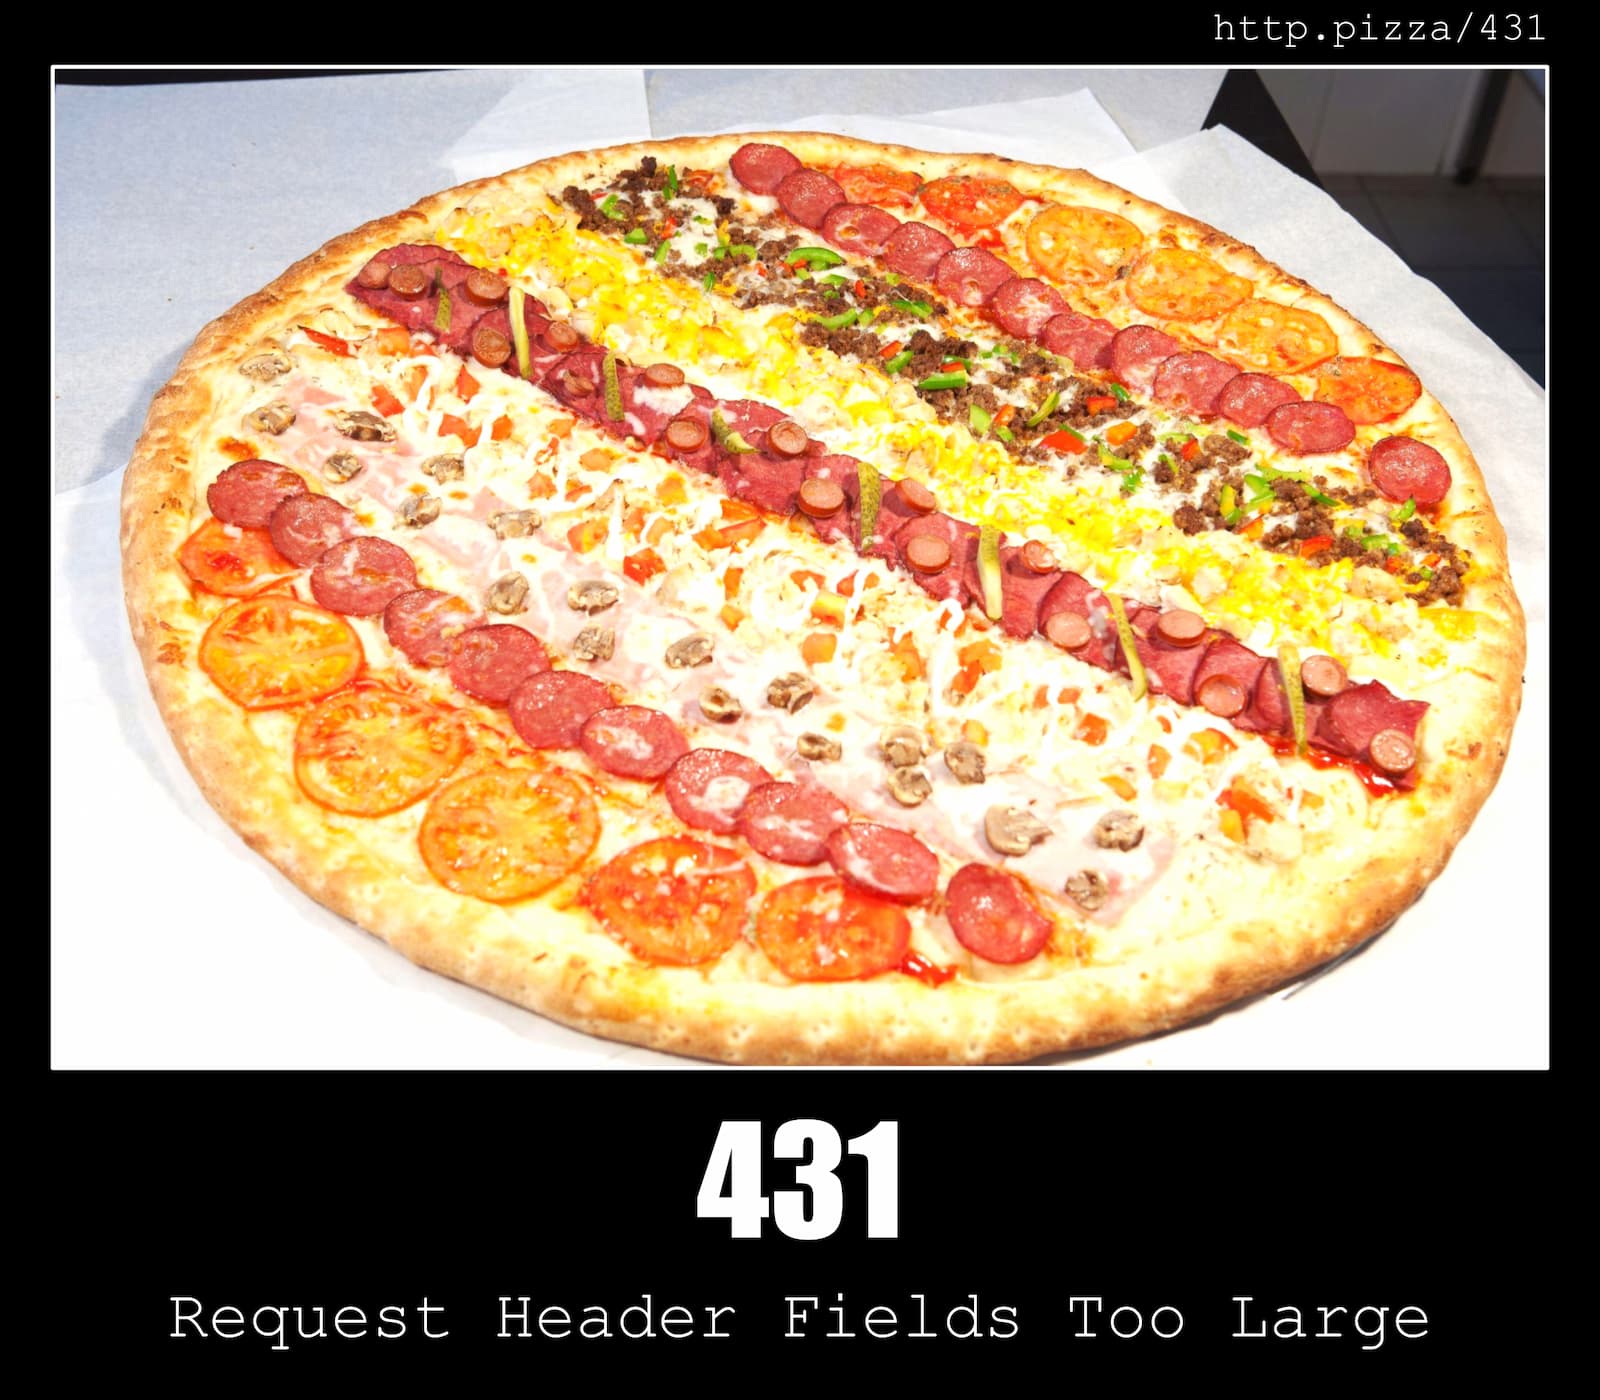 HTTP Status Code 431 Request Header Fields Too Large & Pizzas